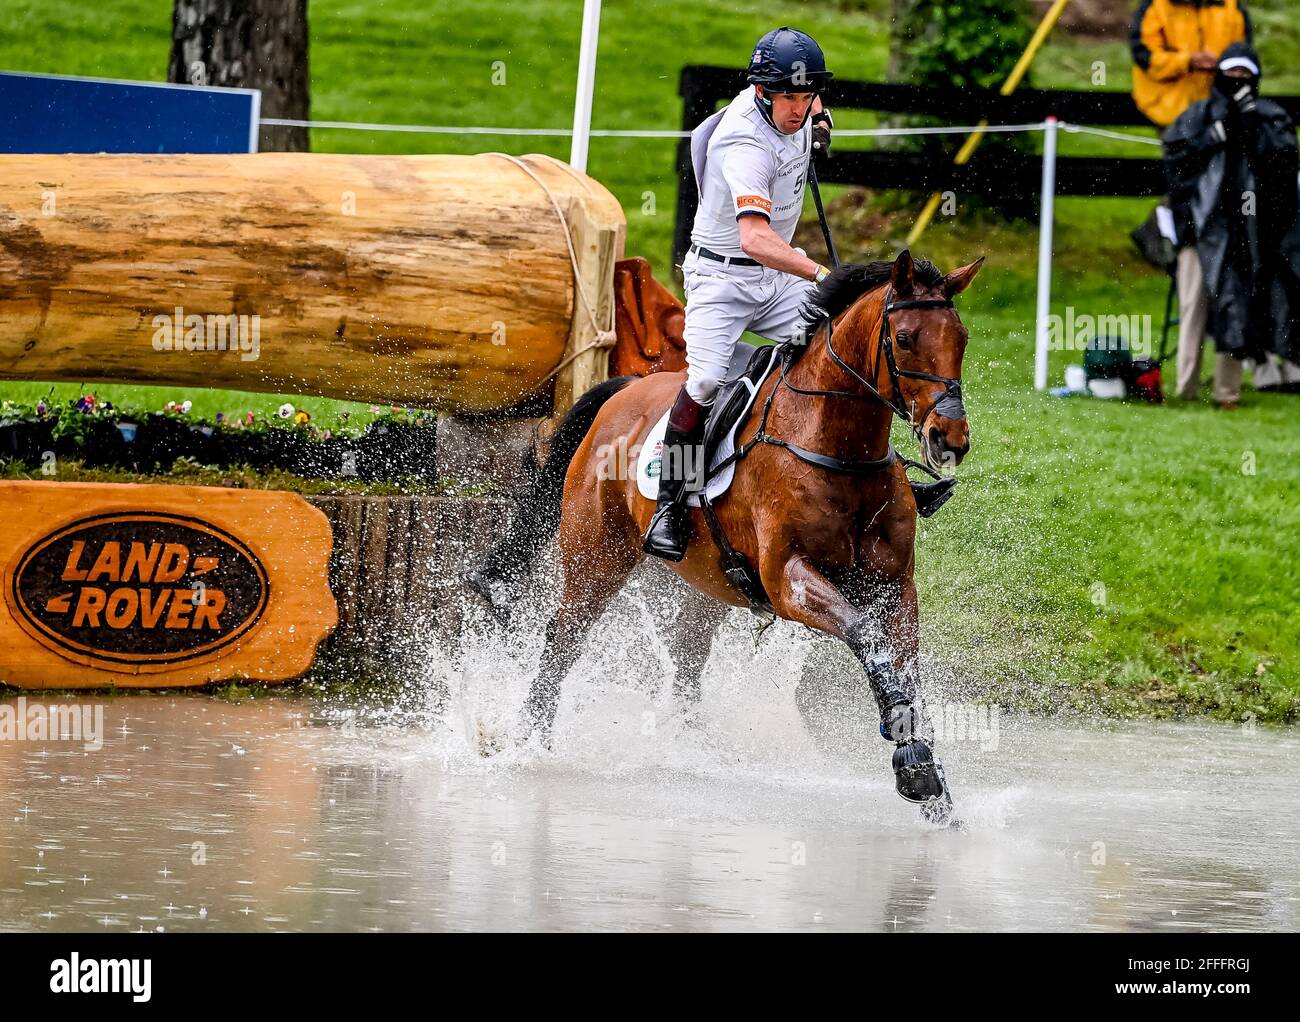 Lexington, KY, USA. 24th Apr, 2021. April 24, 2021: Harry Meade competes in the Cross Country phase of the Land Rover 5* 3-Day Event aboard Superstition at the Kentucky Horse Park in Lexington, Kentucky. Scott Serio/Eclipse Sportswire/CSM/Alamy Live News Stock Photo